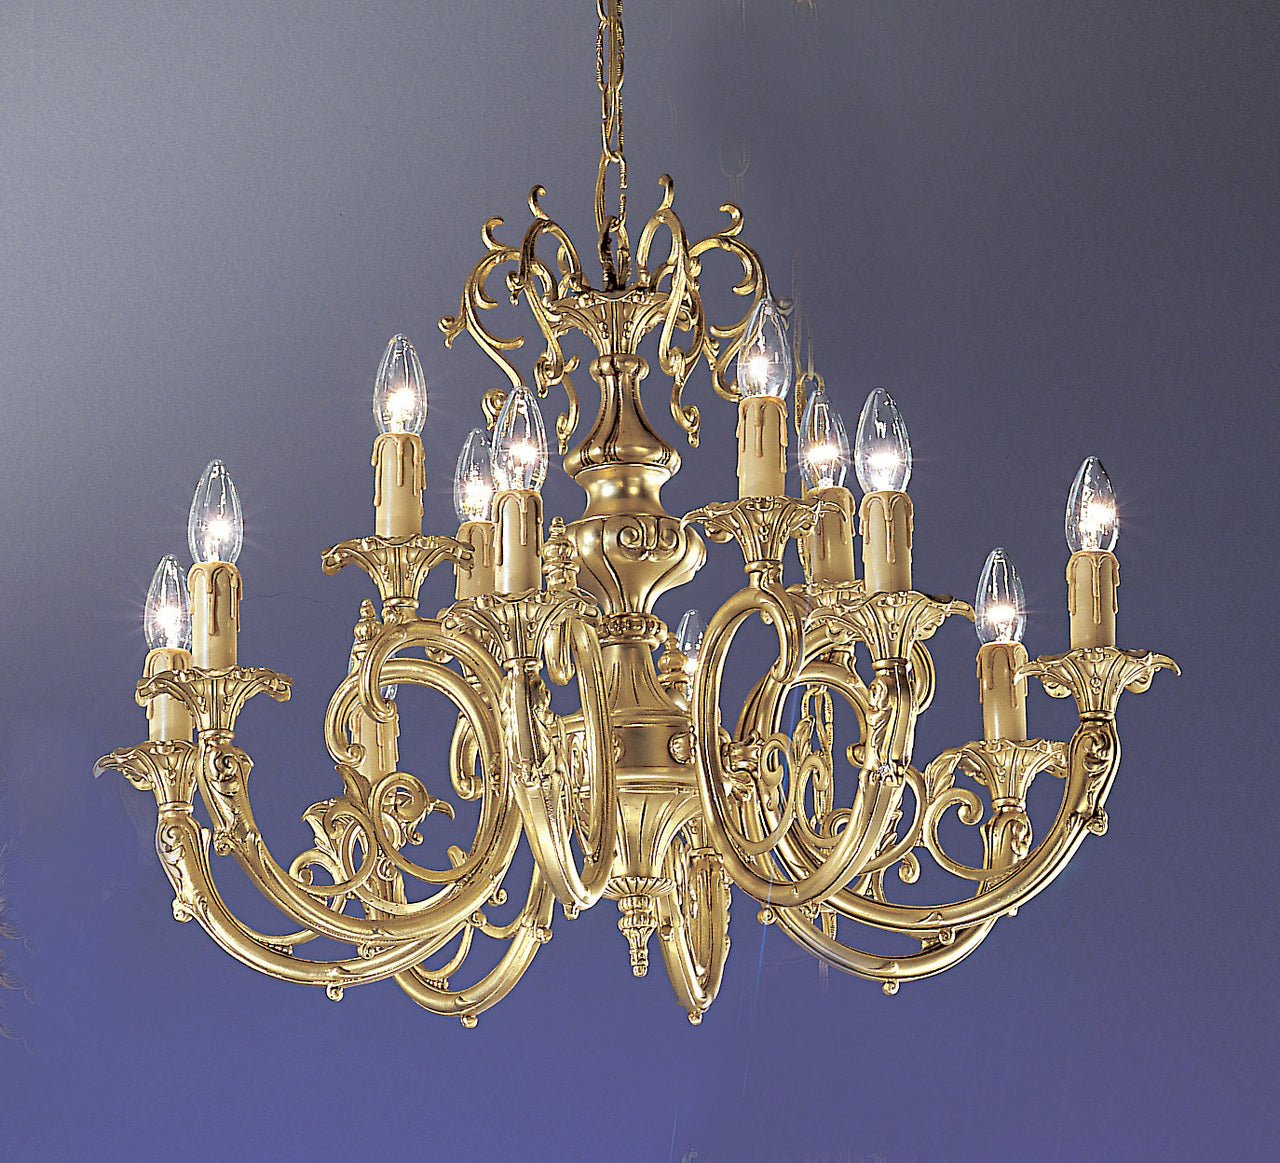 Classic Lighting 5712 SBB C Princeton Crystal/Cast Brass Chandelier in Satin Bronze/Brown Patina (Imported from Spain)